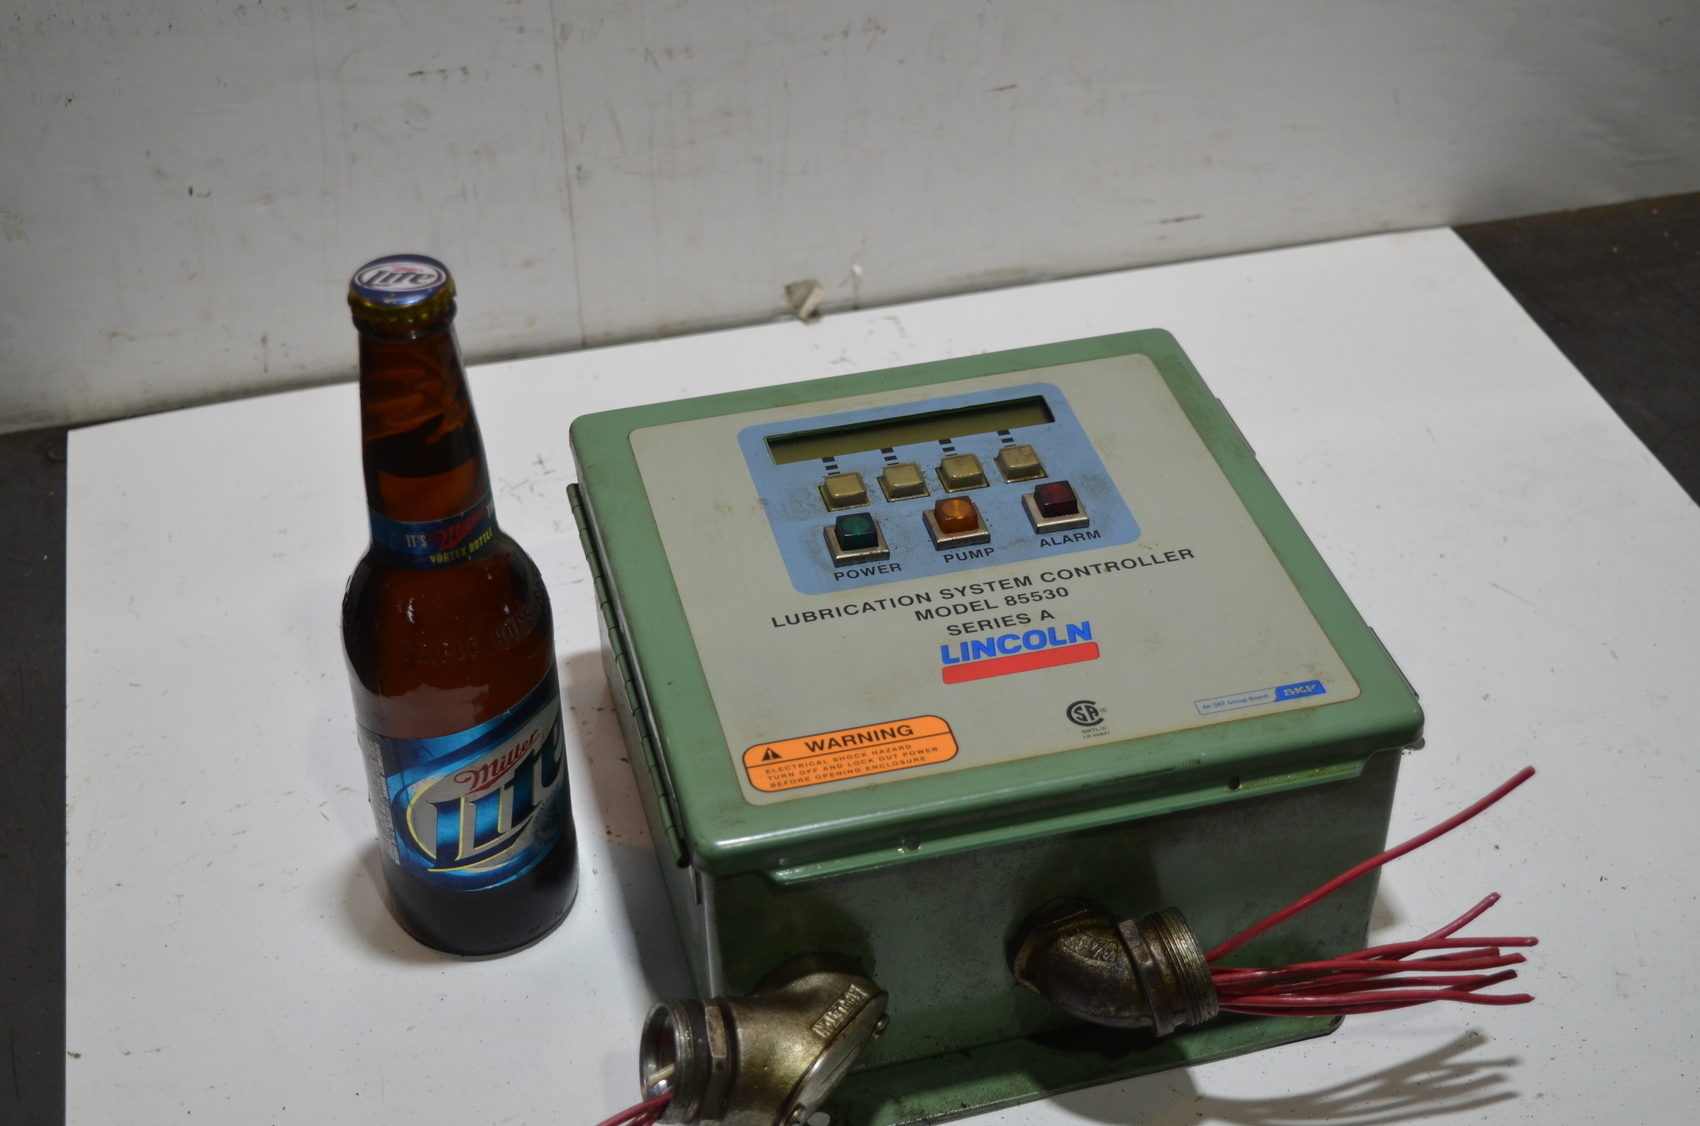 Lincoln SKF Model 85530 Lubrication System Controller Series A